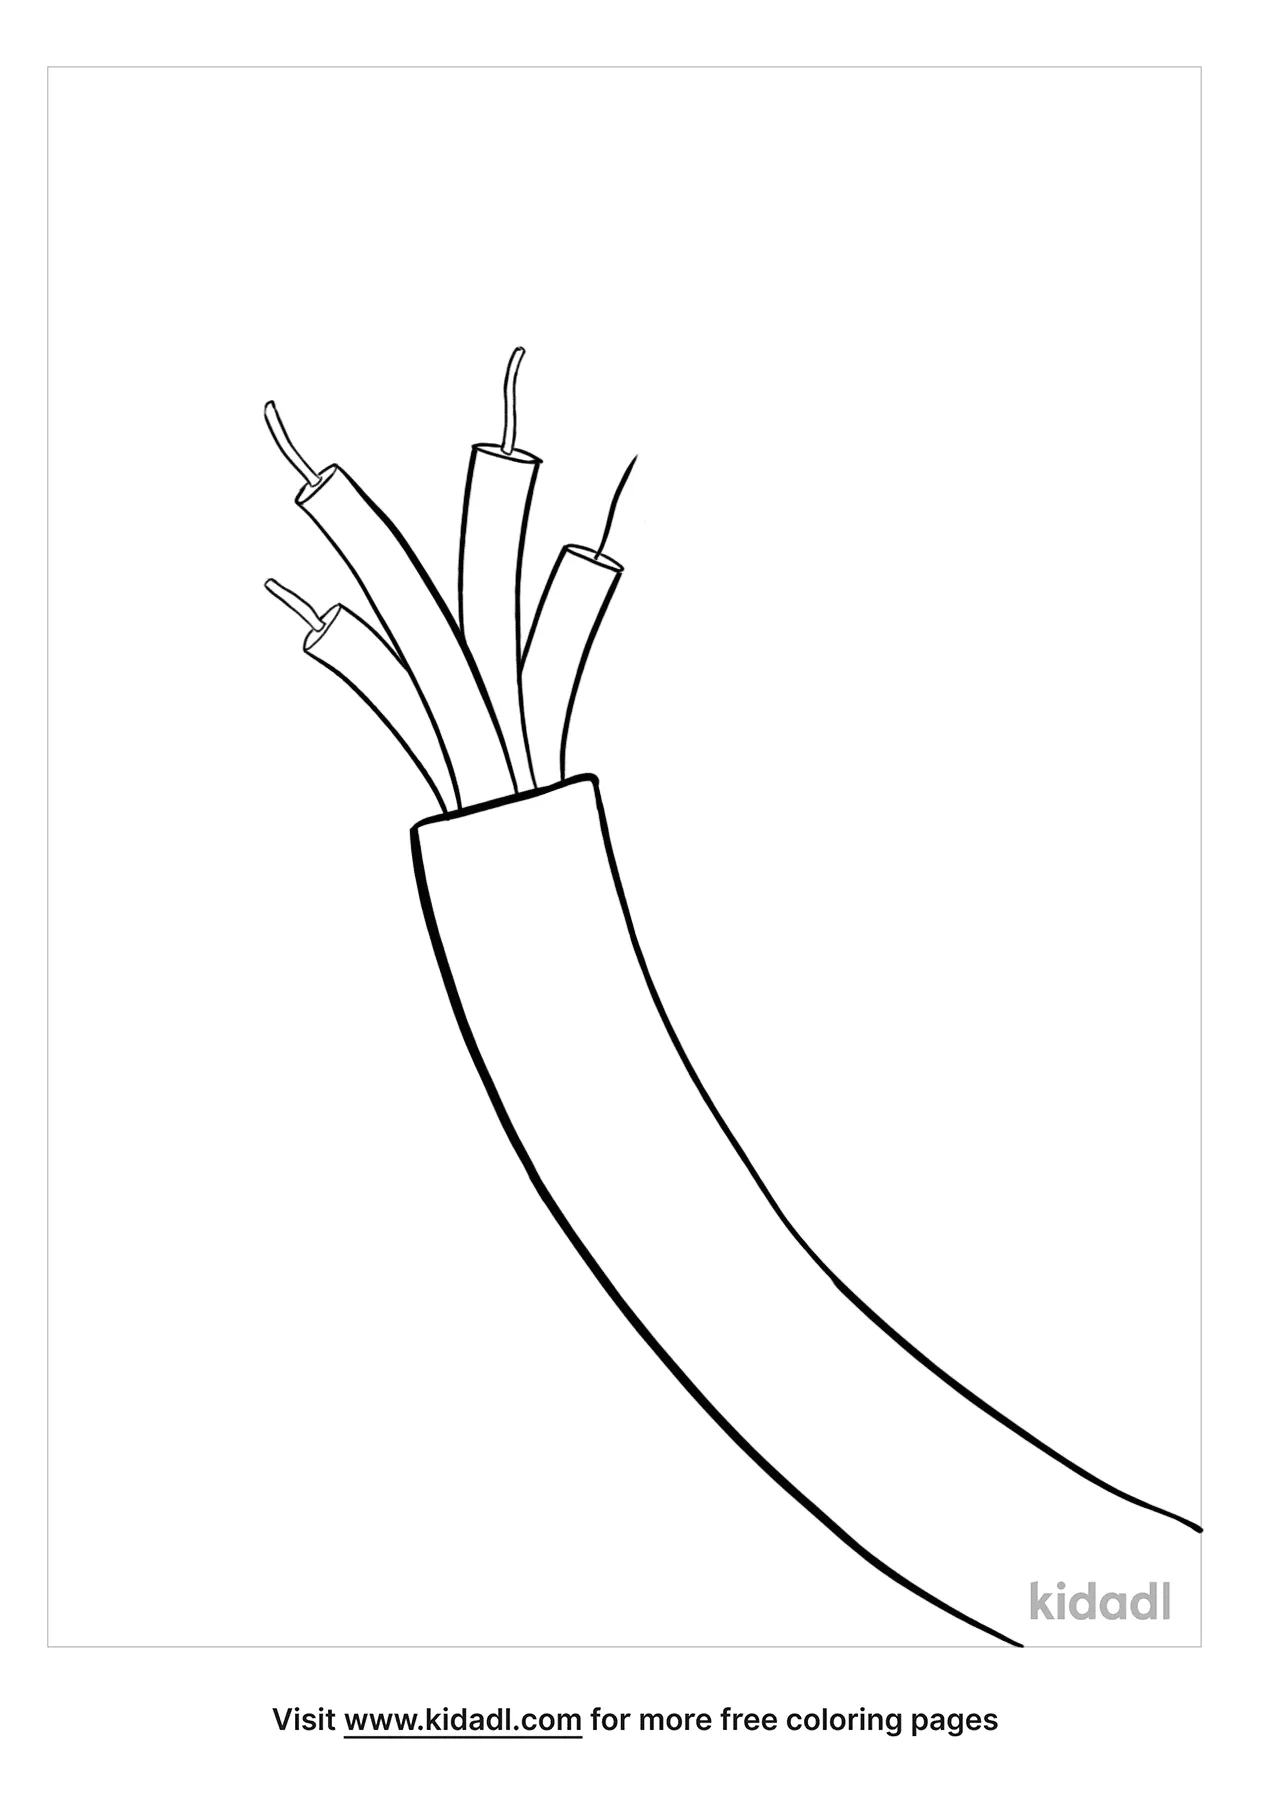 Wires Coloring Page